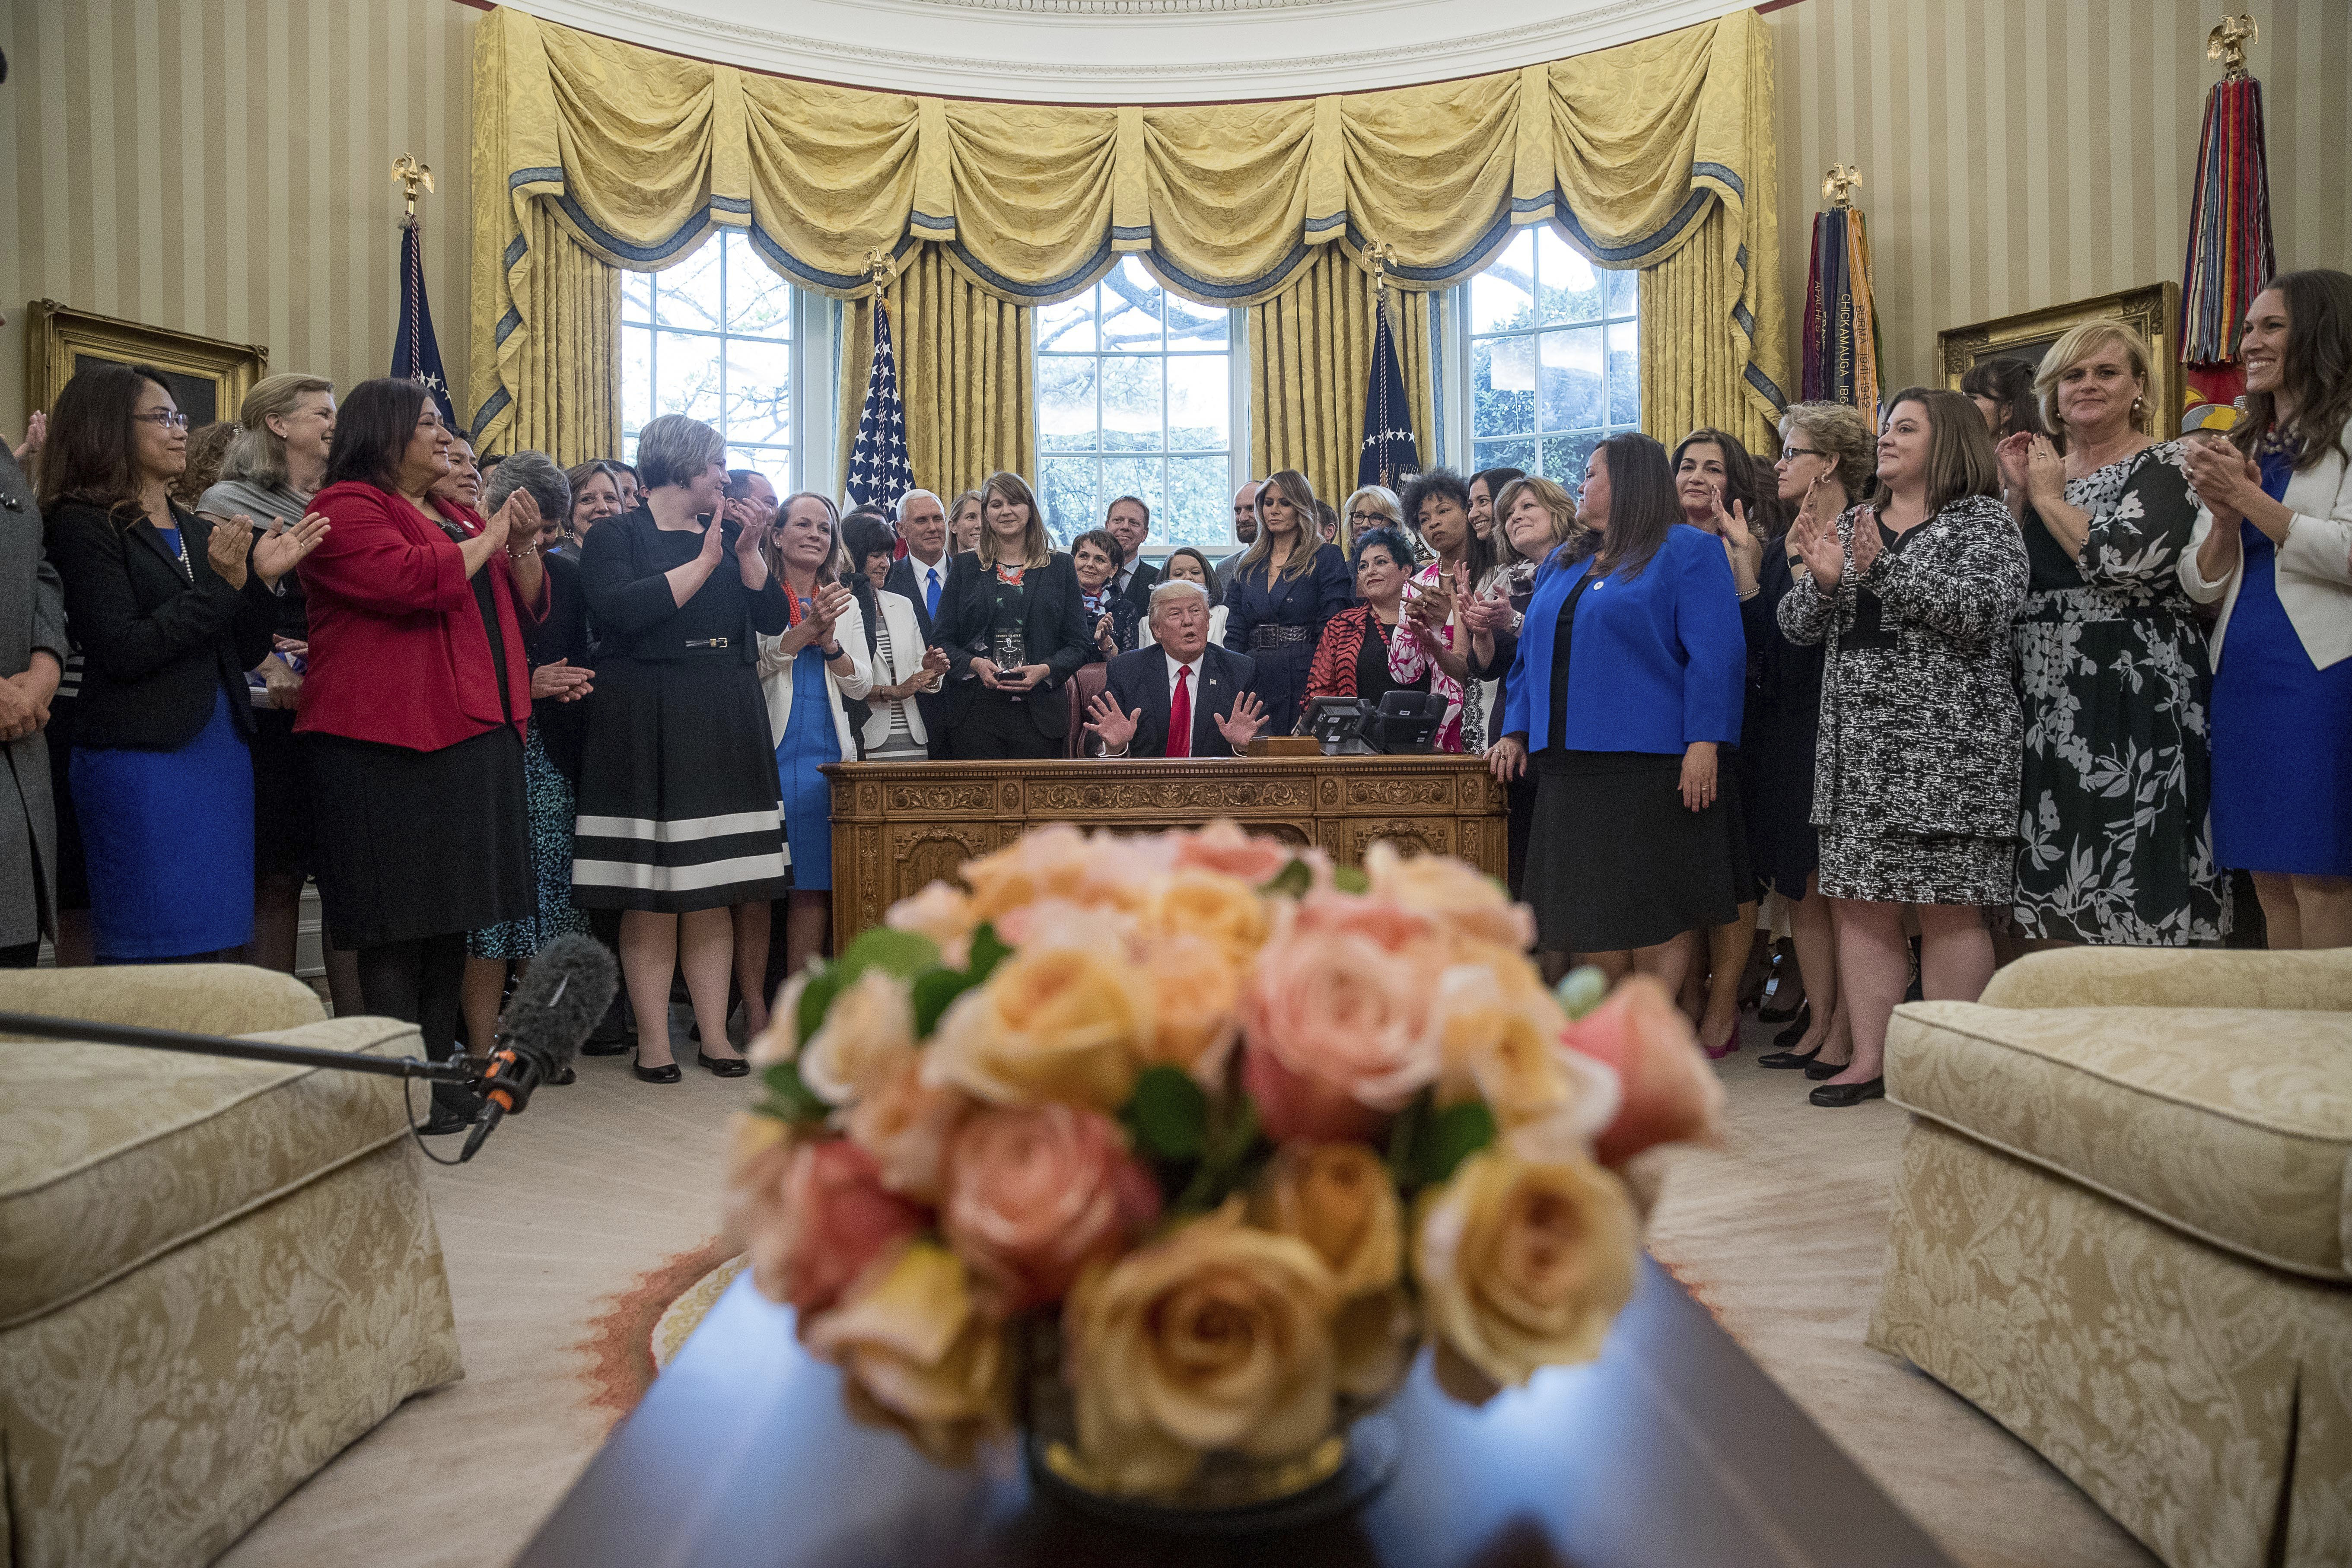 foto : andrew harnik : day 97 - in this april 26, 2017, file photo, president donald trump, center, speaks at a national teacher of the year event in the oval office at the white house in washington. (ap photo/andrew harnik, file)